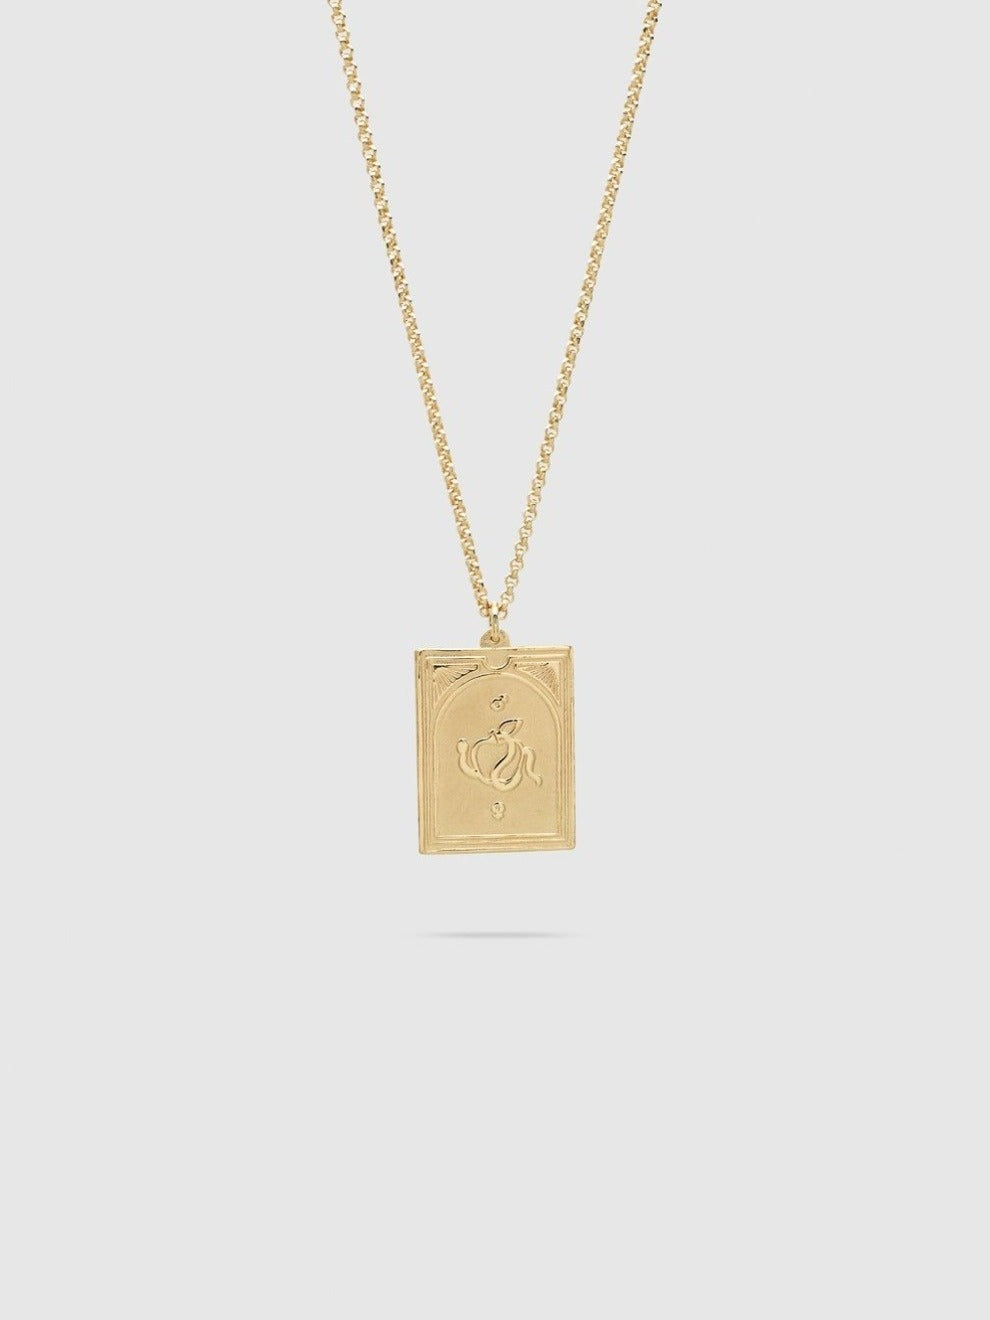 Tom Wood Tarot Lovers Pendant Necklace in Gold